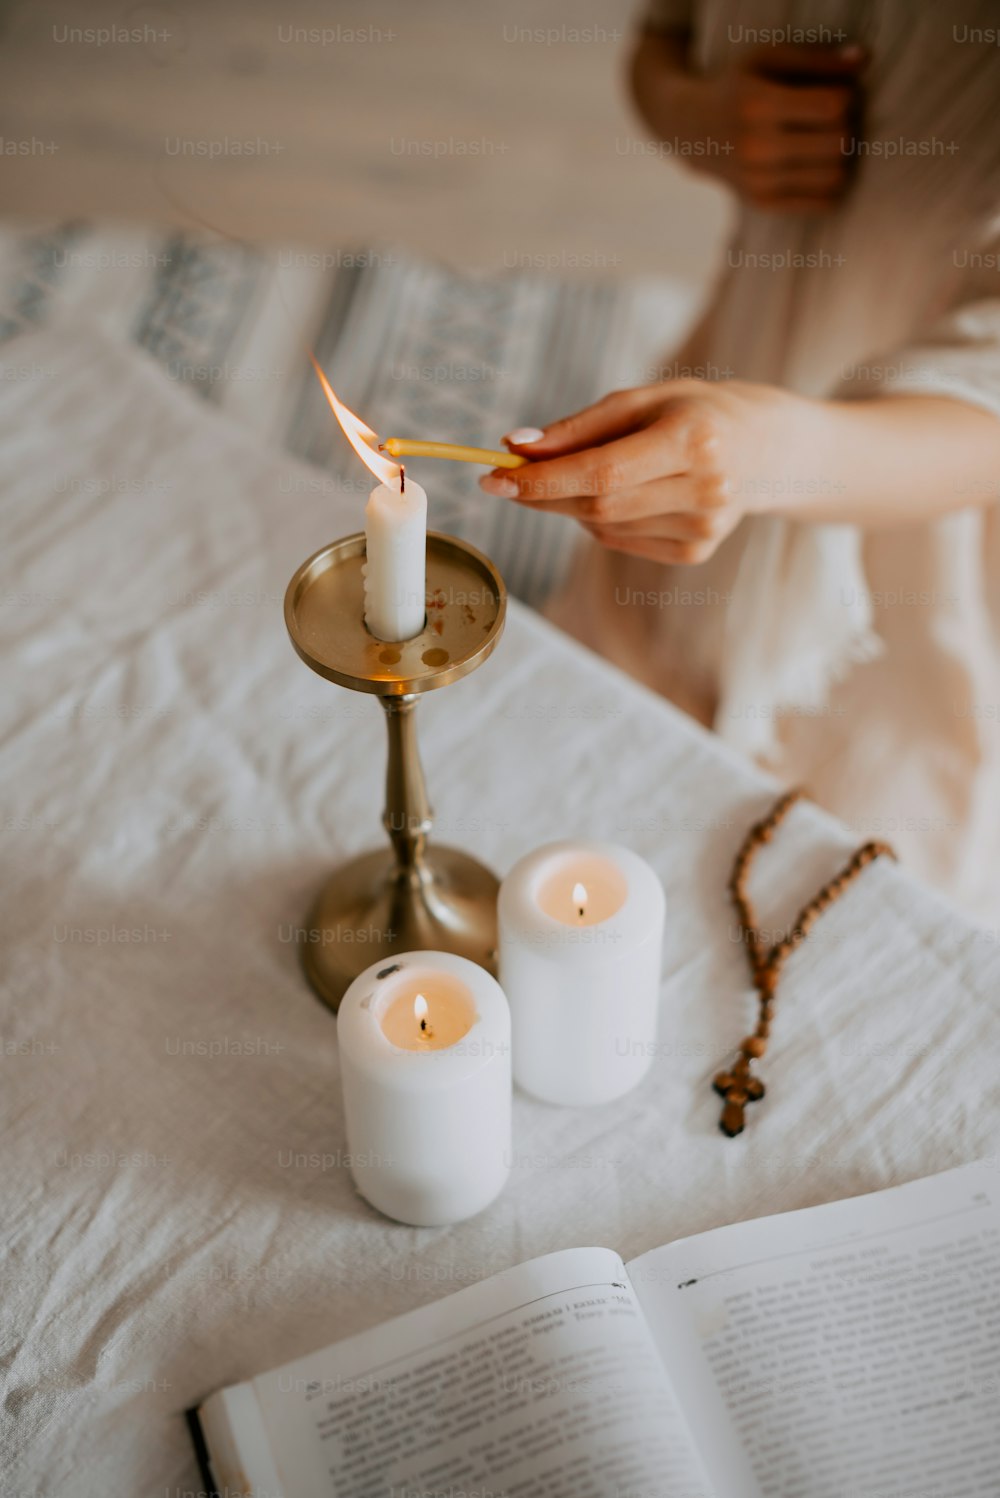 a person lighting a candle on a bed